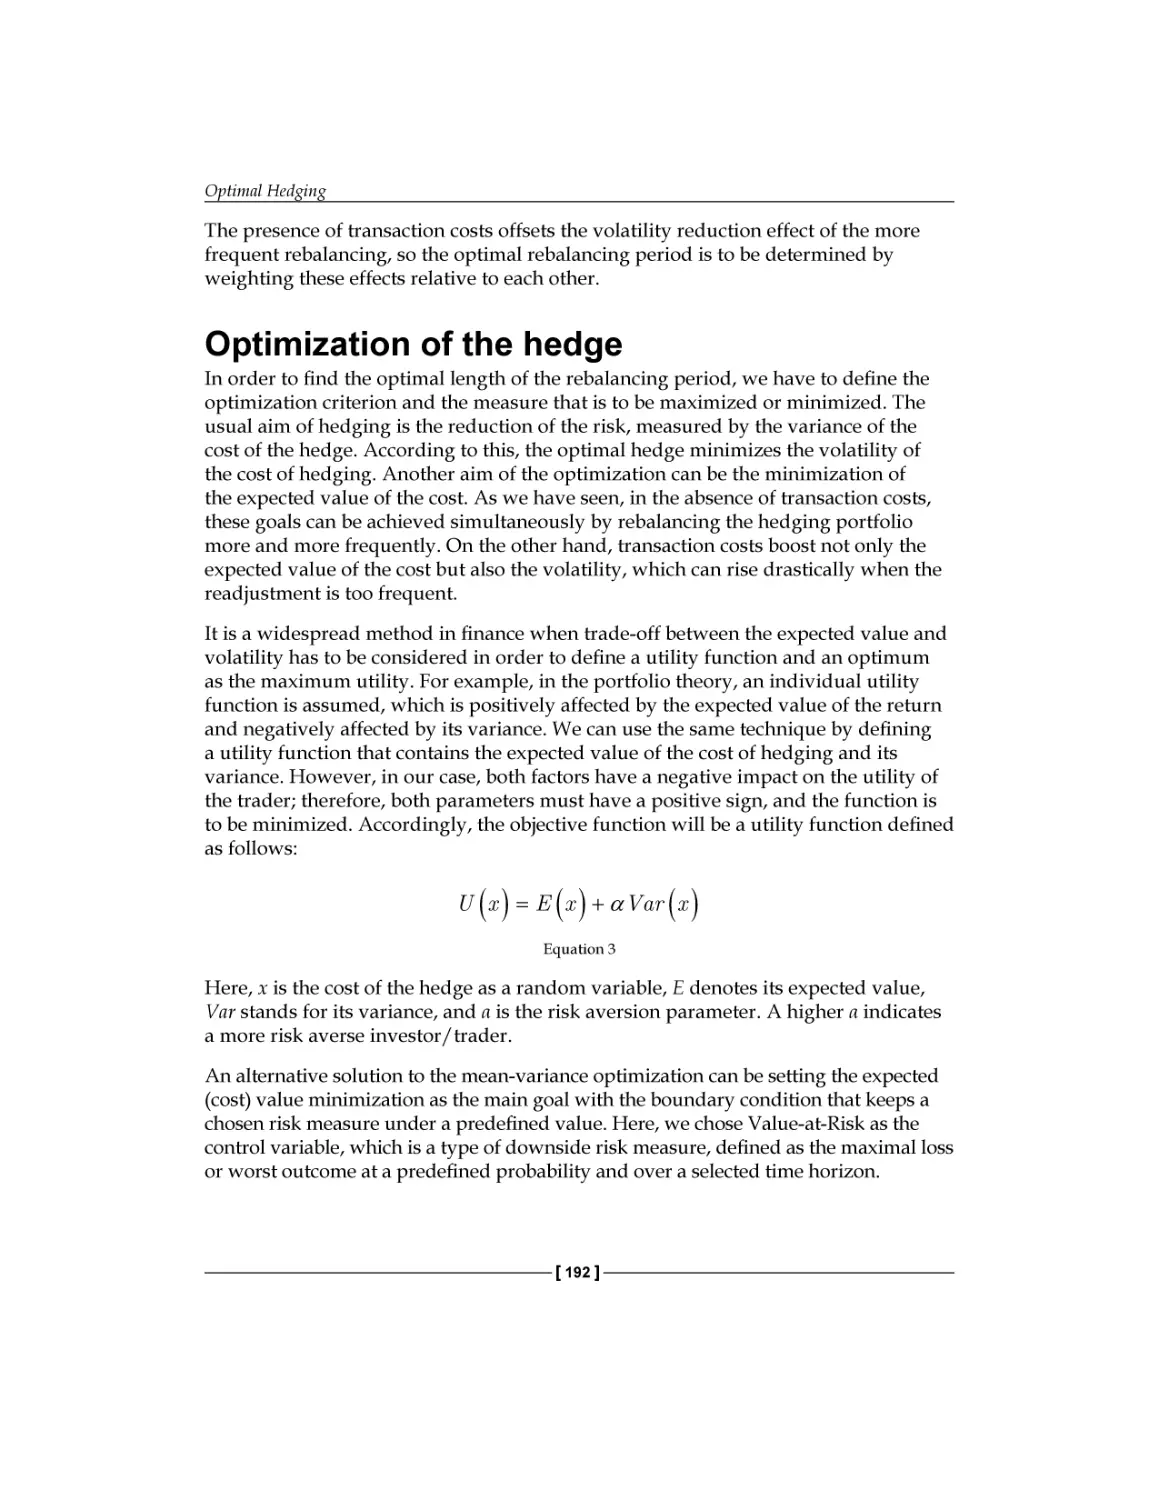 Optimization of the hedge